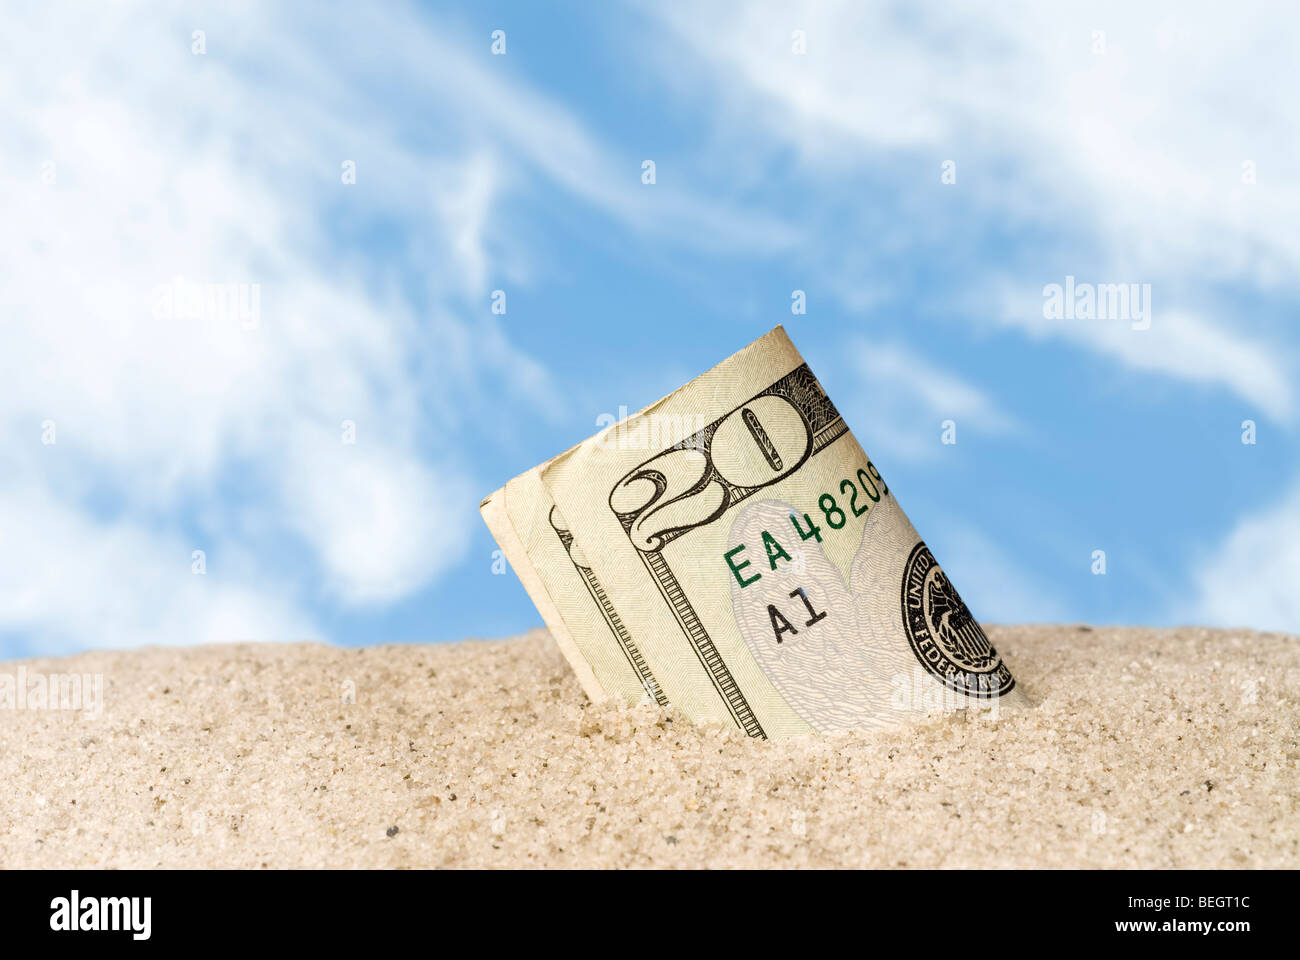 A wad of cash lost and found in the sand at the beach. Stock Photo